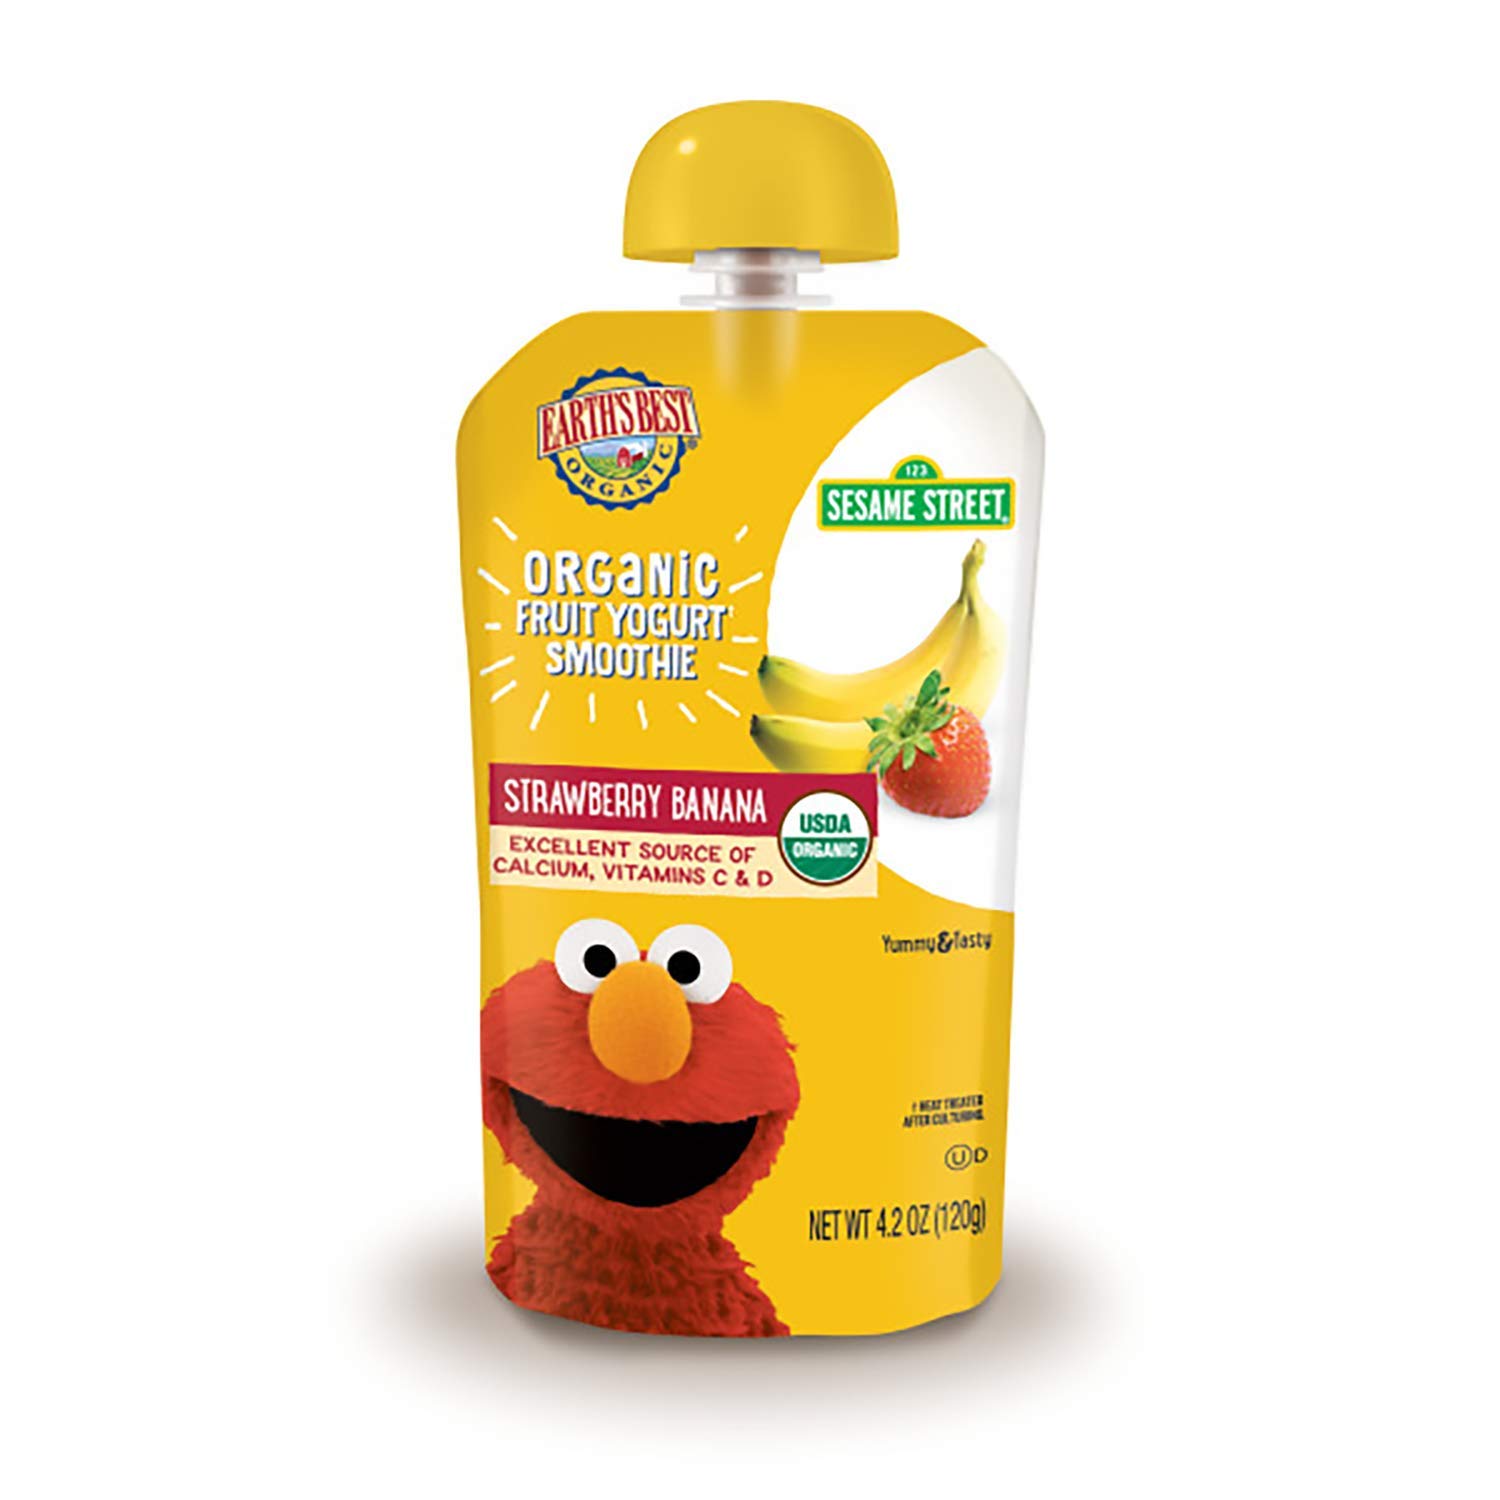 Price mistake Earth's Best Organic Sesame Street Toddler Snacks, Organic Fruit Yogurt Smoothie Strawberry Banana, 4.2 oz Resealable Pouch ( 12 Count $1.64